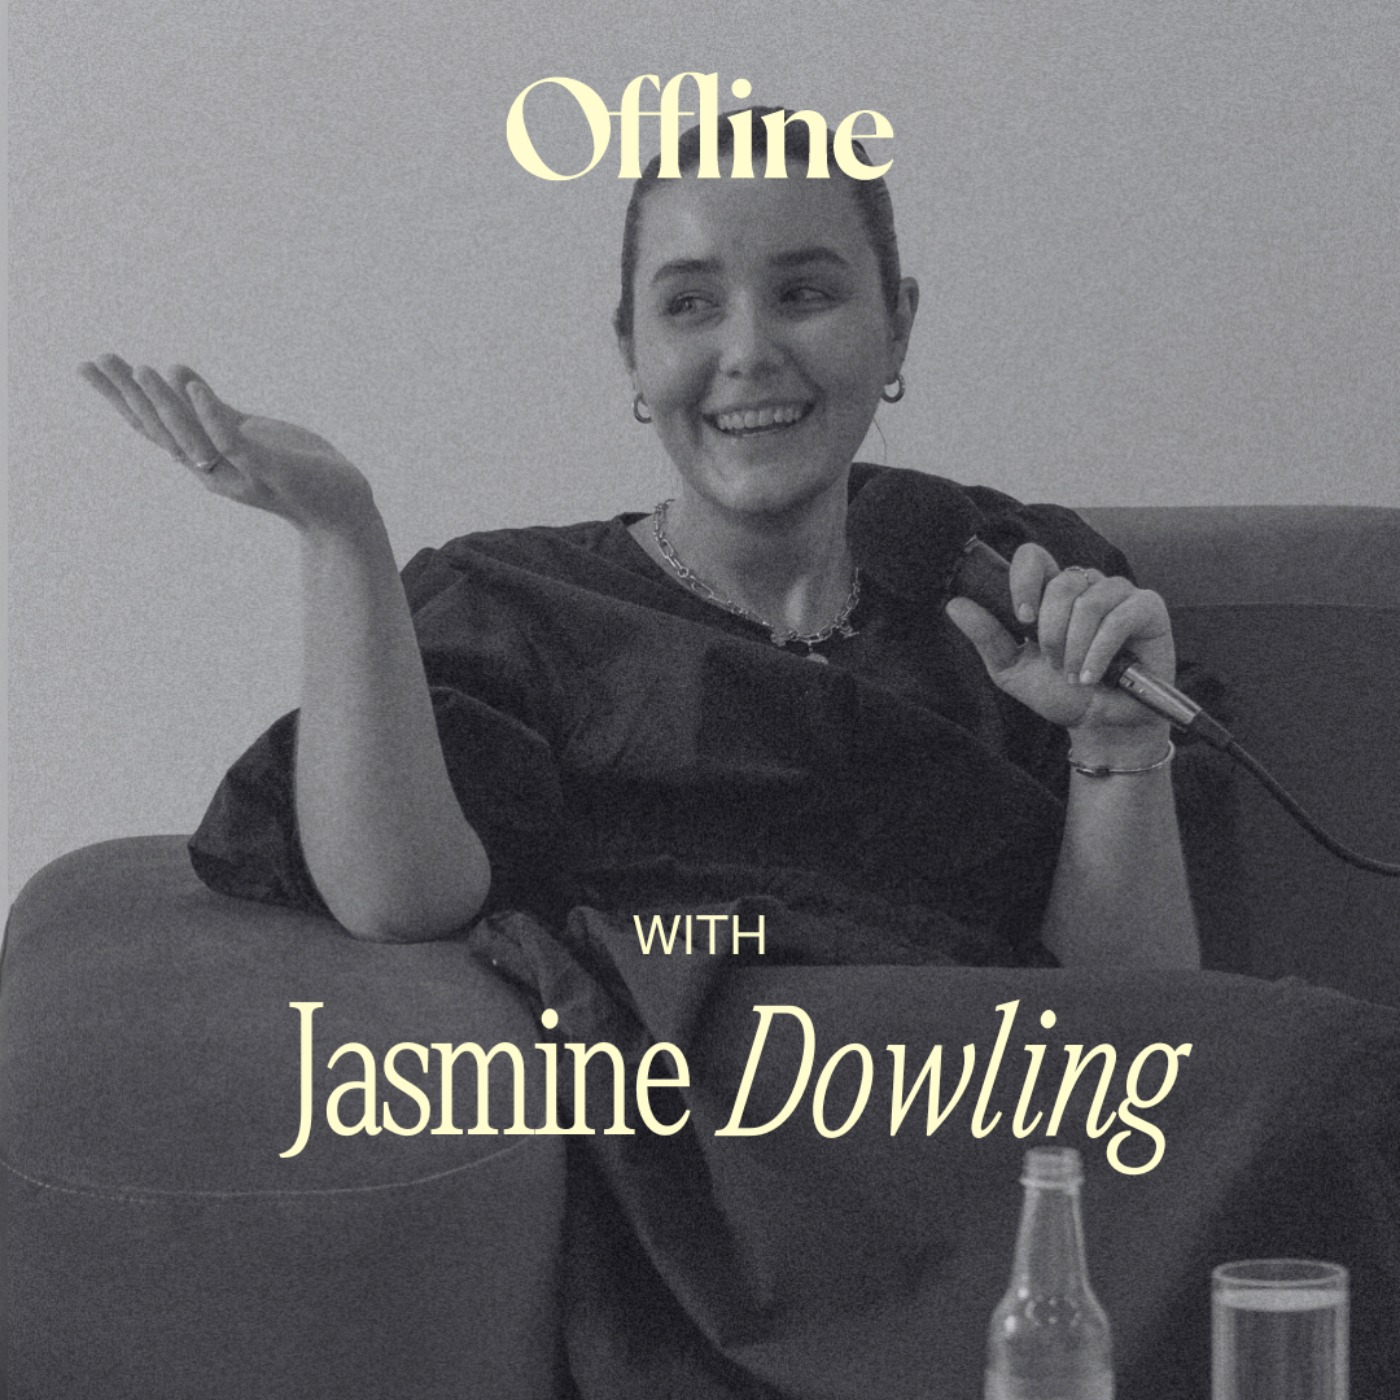 Checking in with Jasmine Dowling.